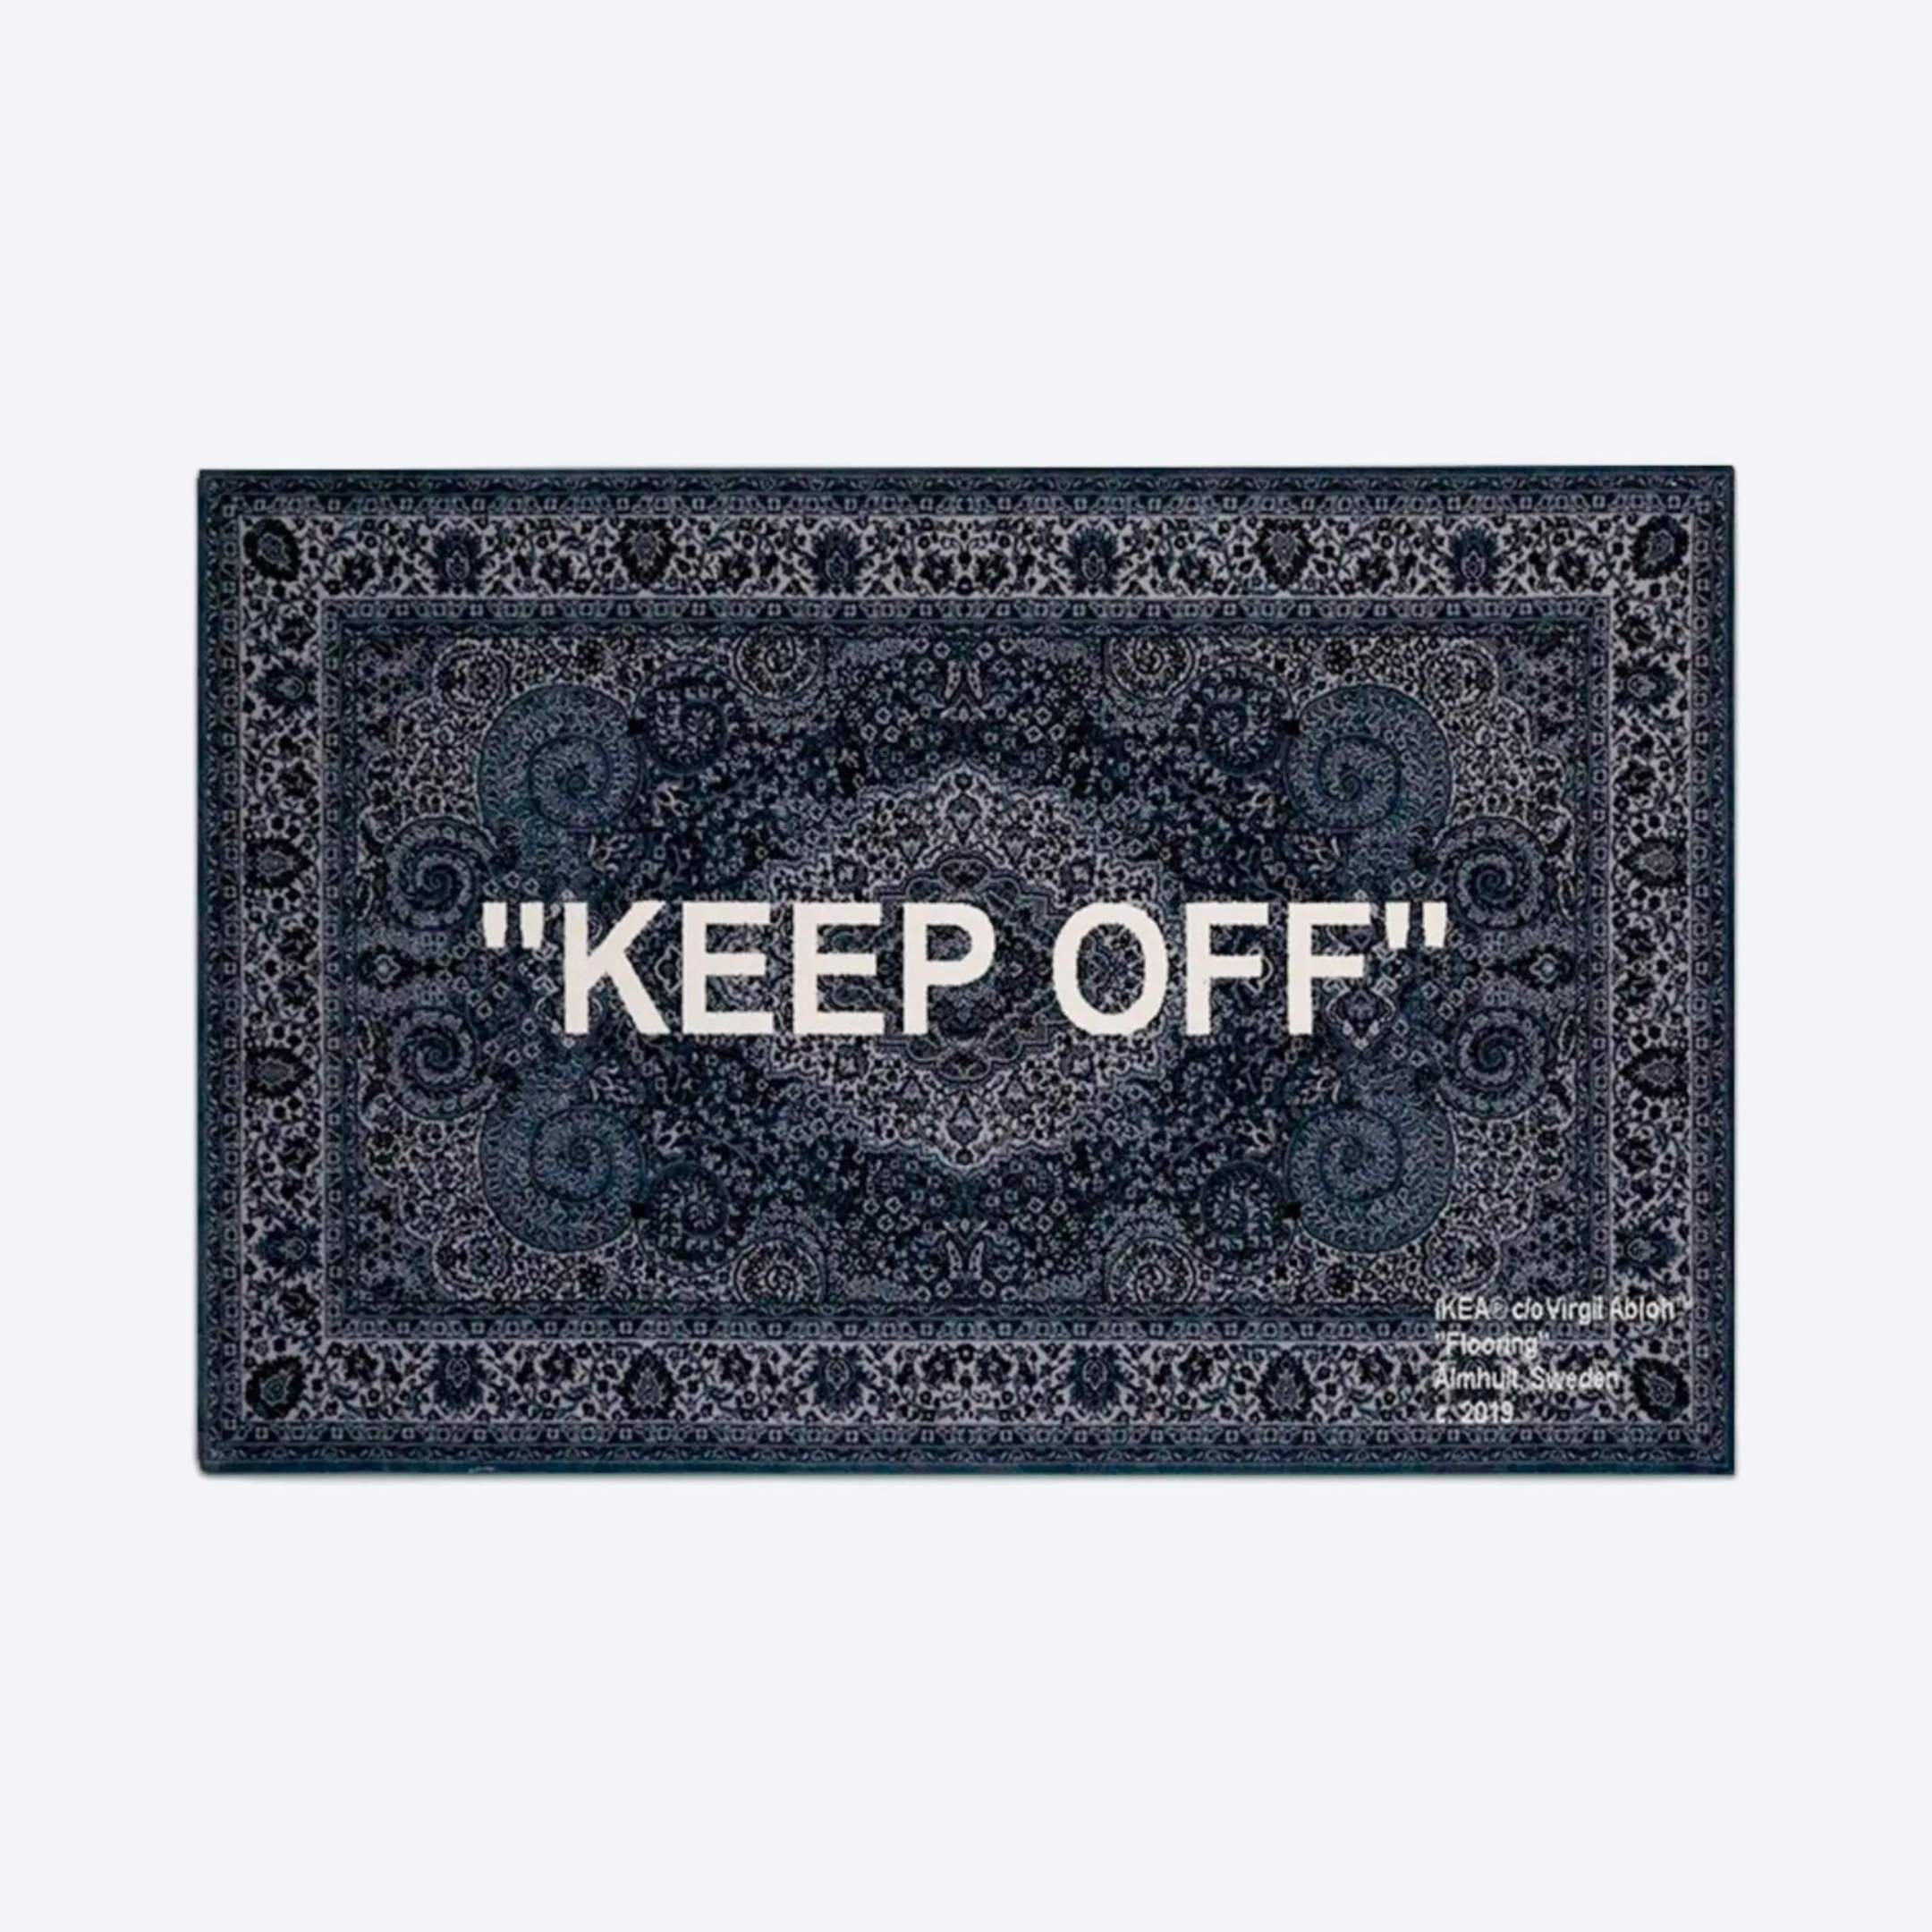 The Virgil Abloh IKEA KEEP OFF Rug is Worth Almost $3,000 - Resell